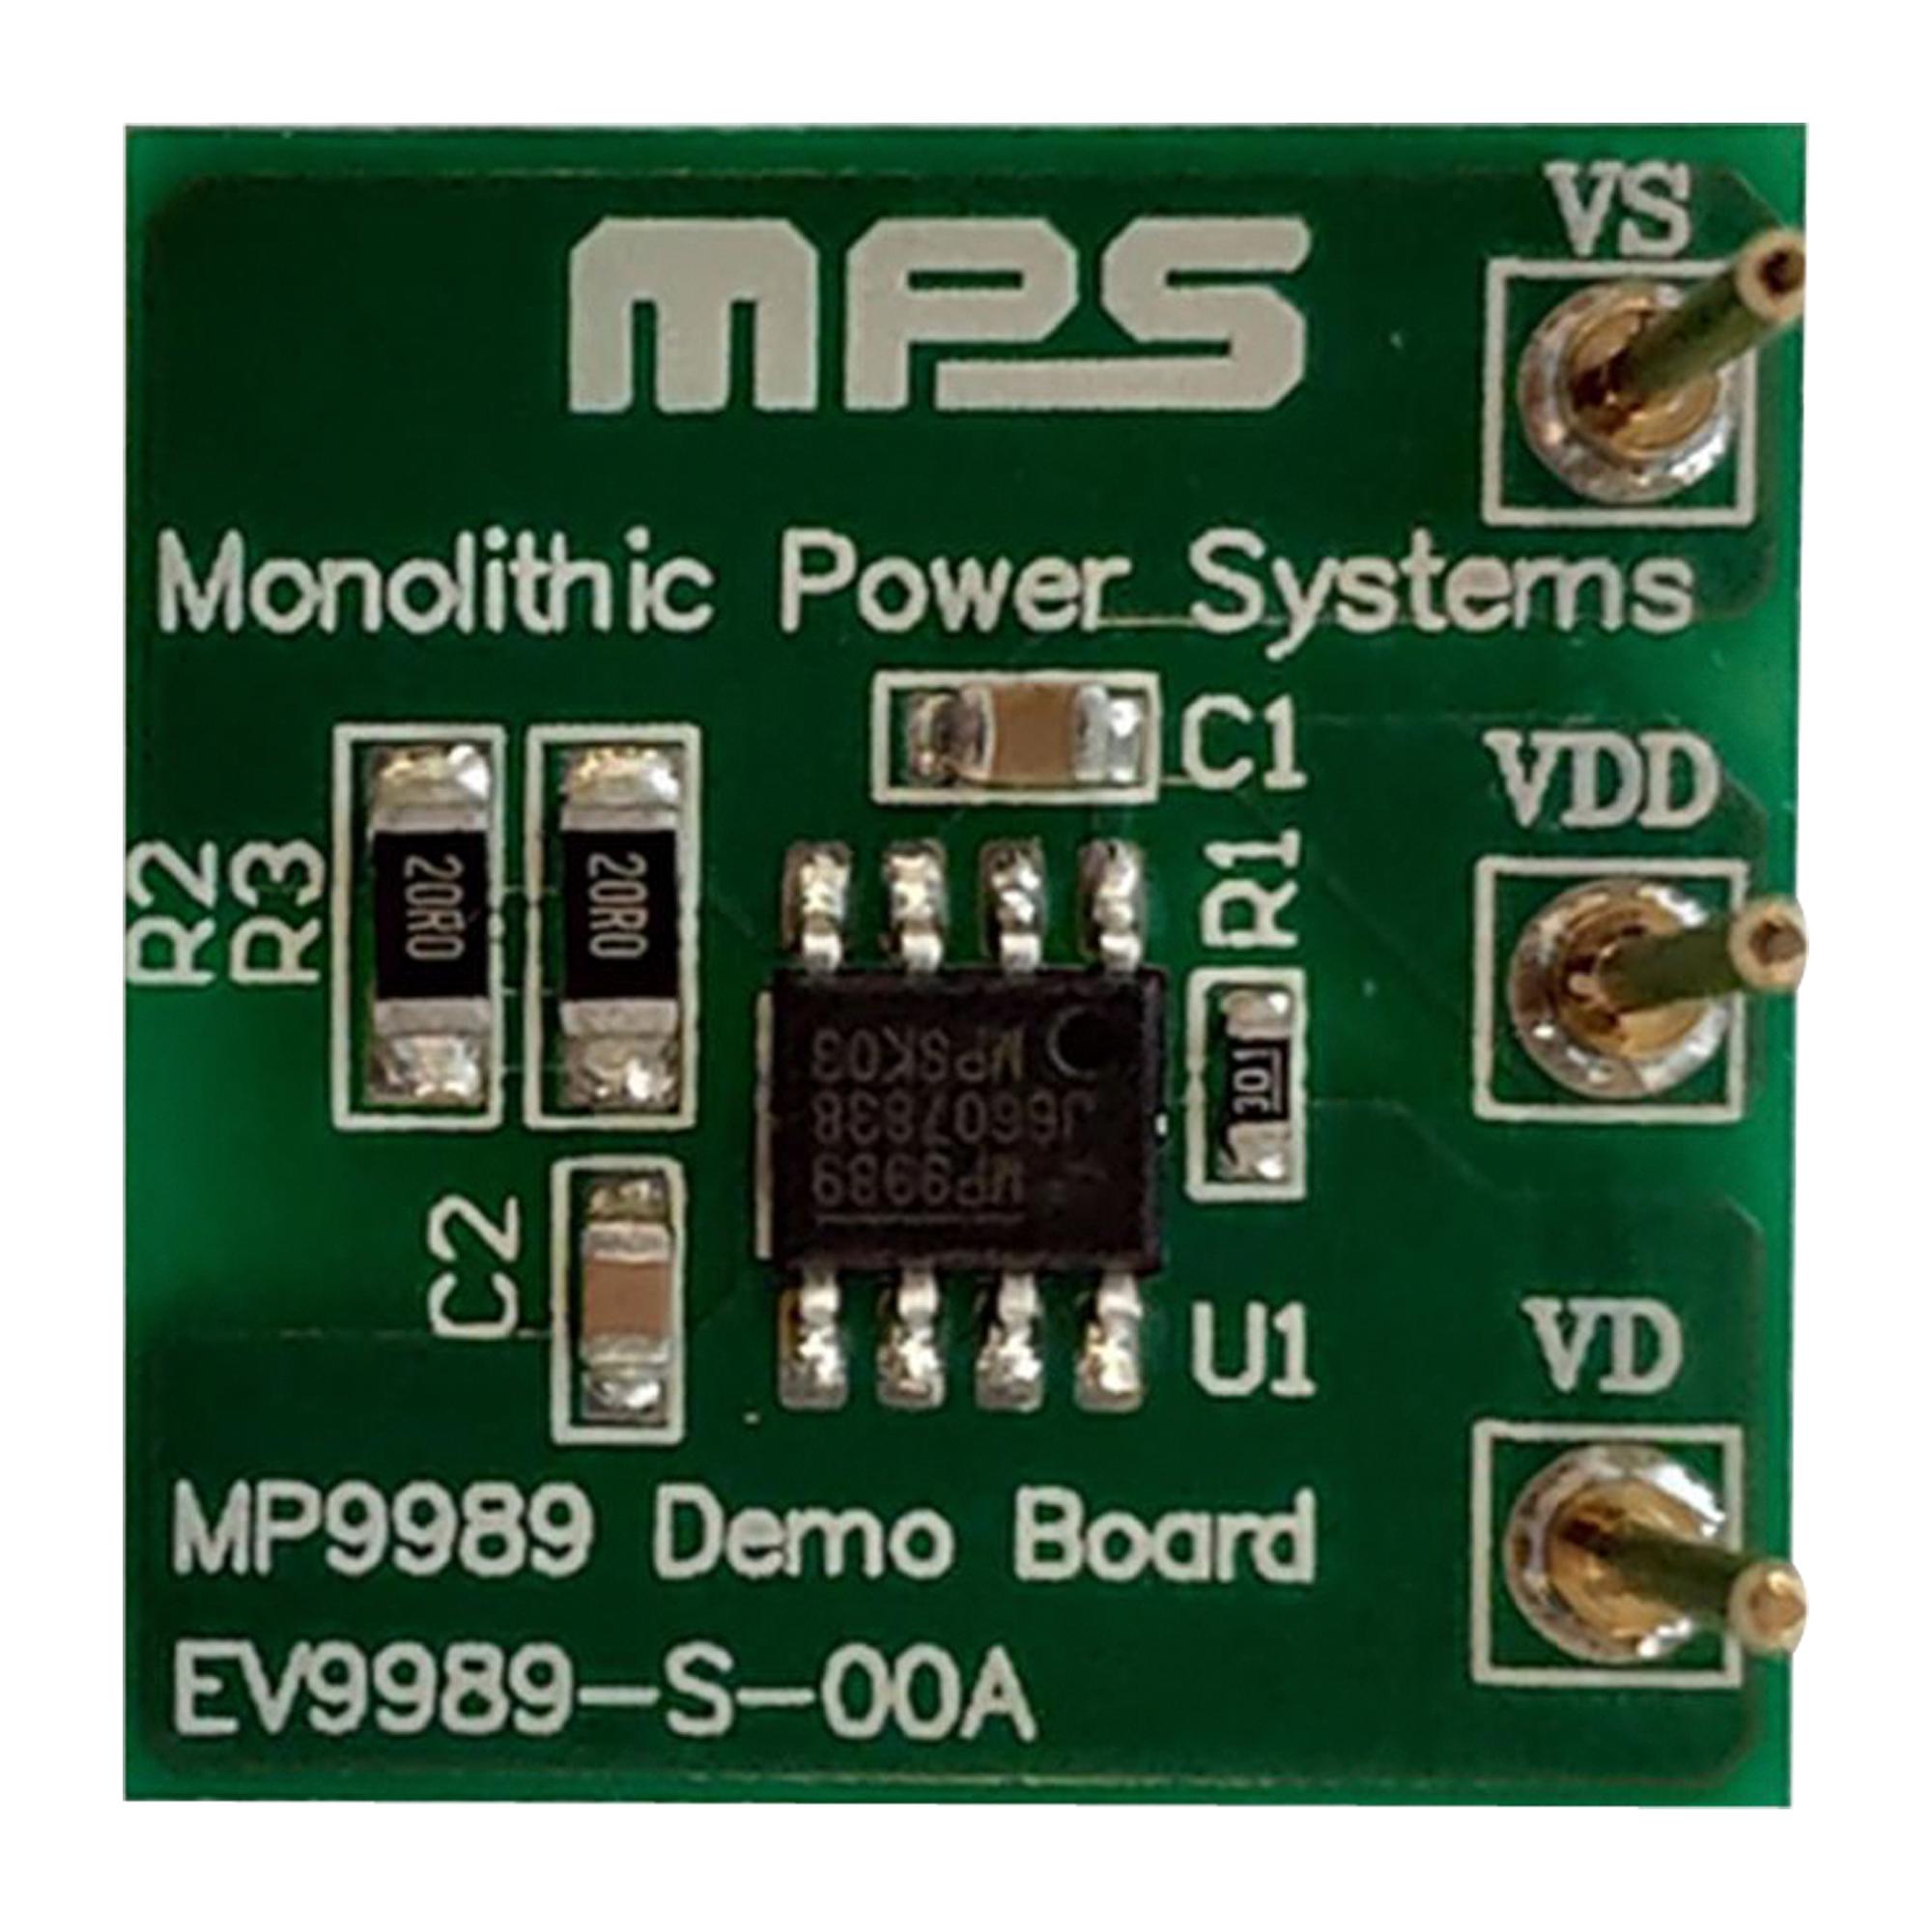 EV9989-S-00A EVAL BOARD, RECTIFIER, FLYBACK CONVERTER MONOLITHIC POWER SYSTEMS (MPS)